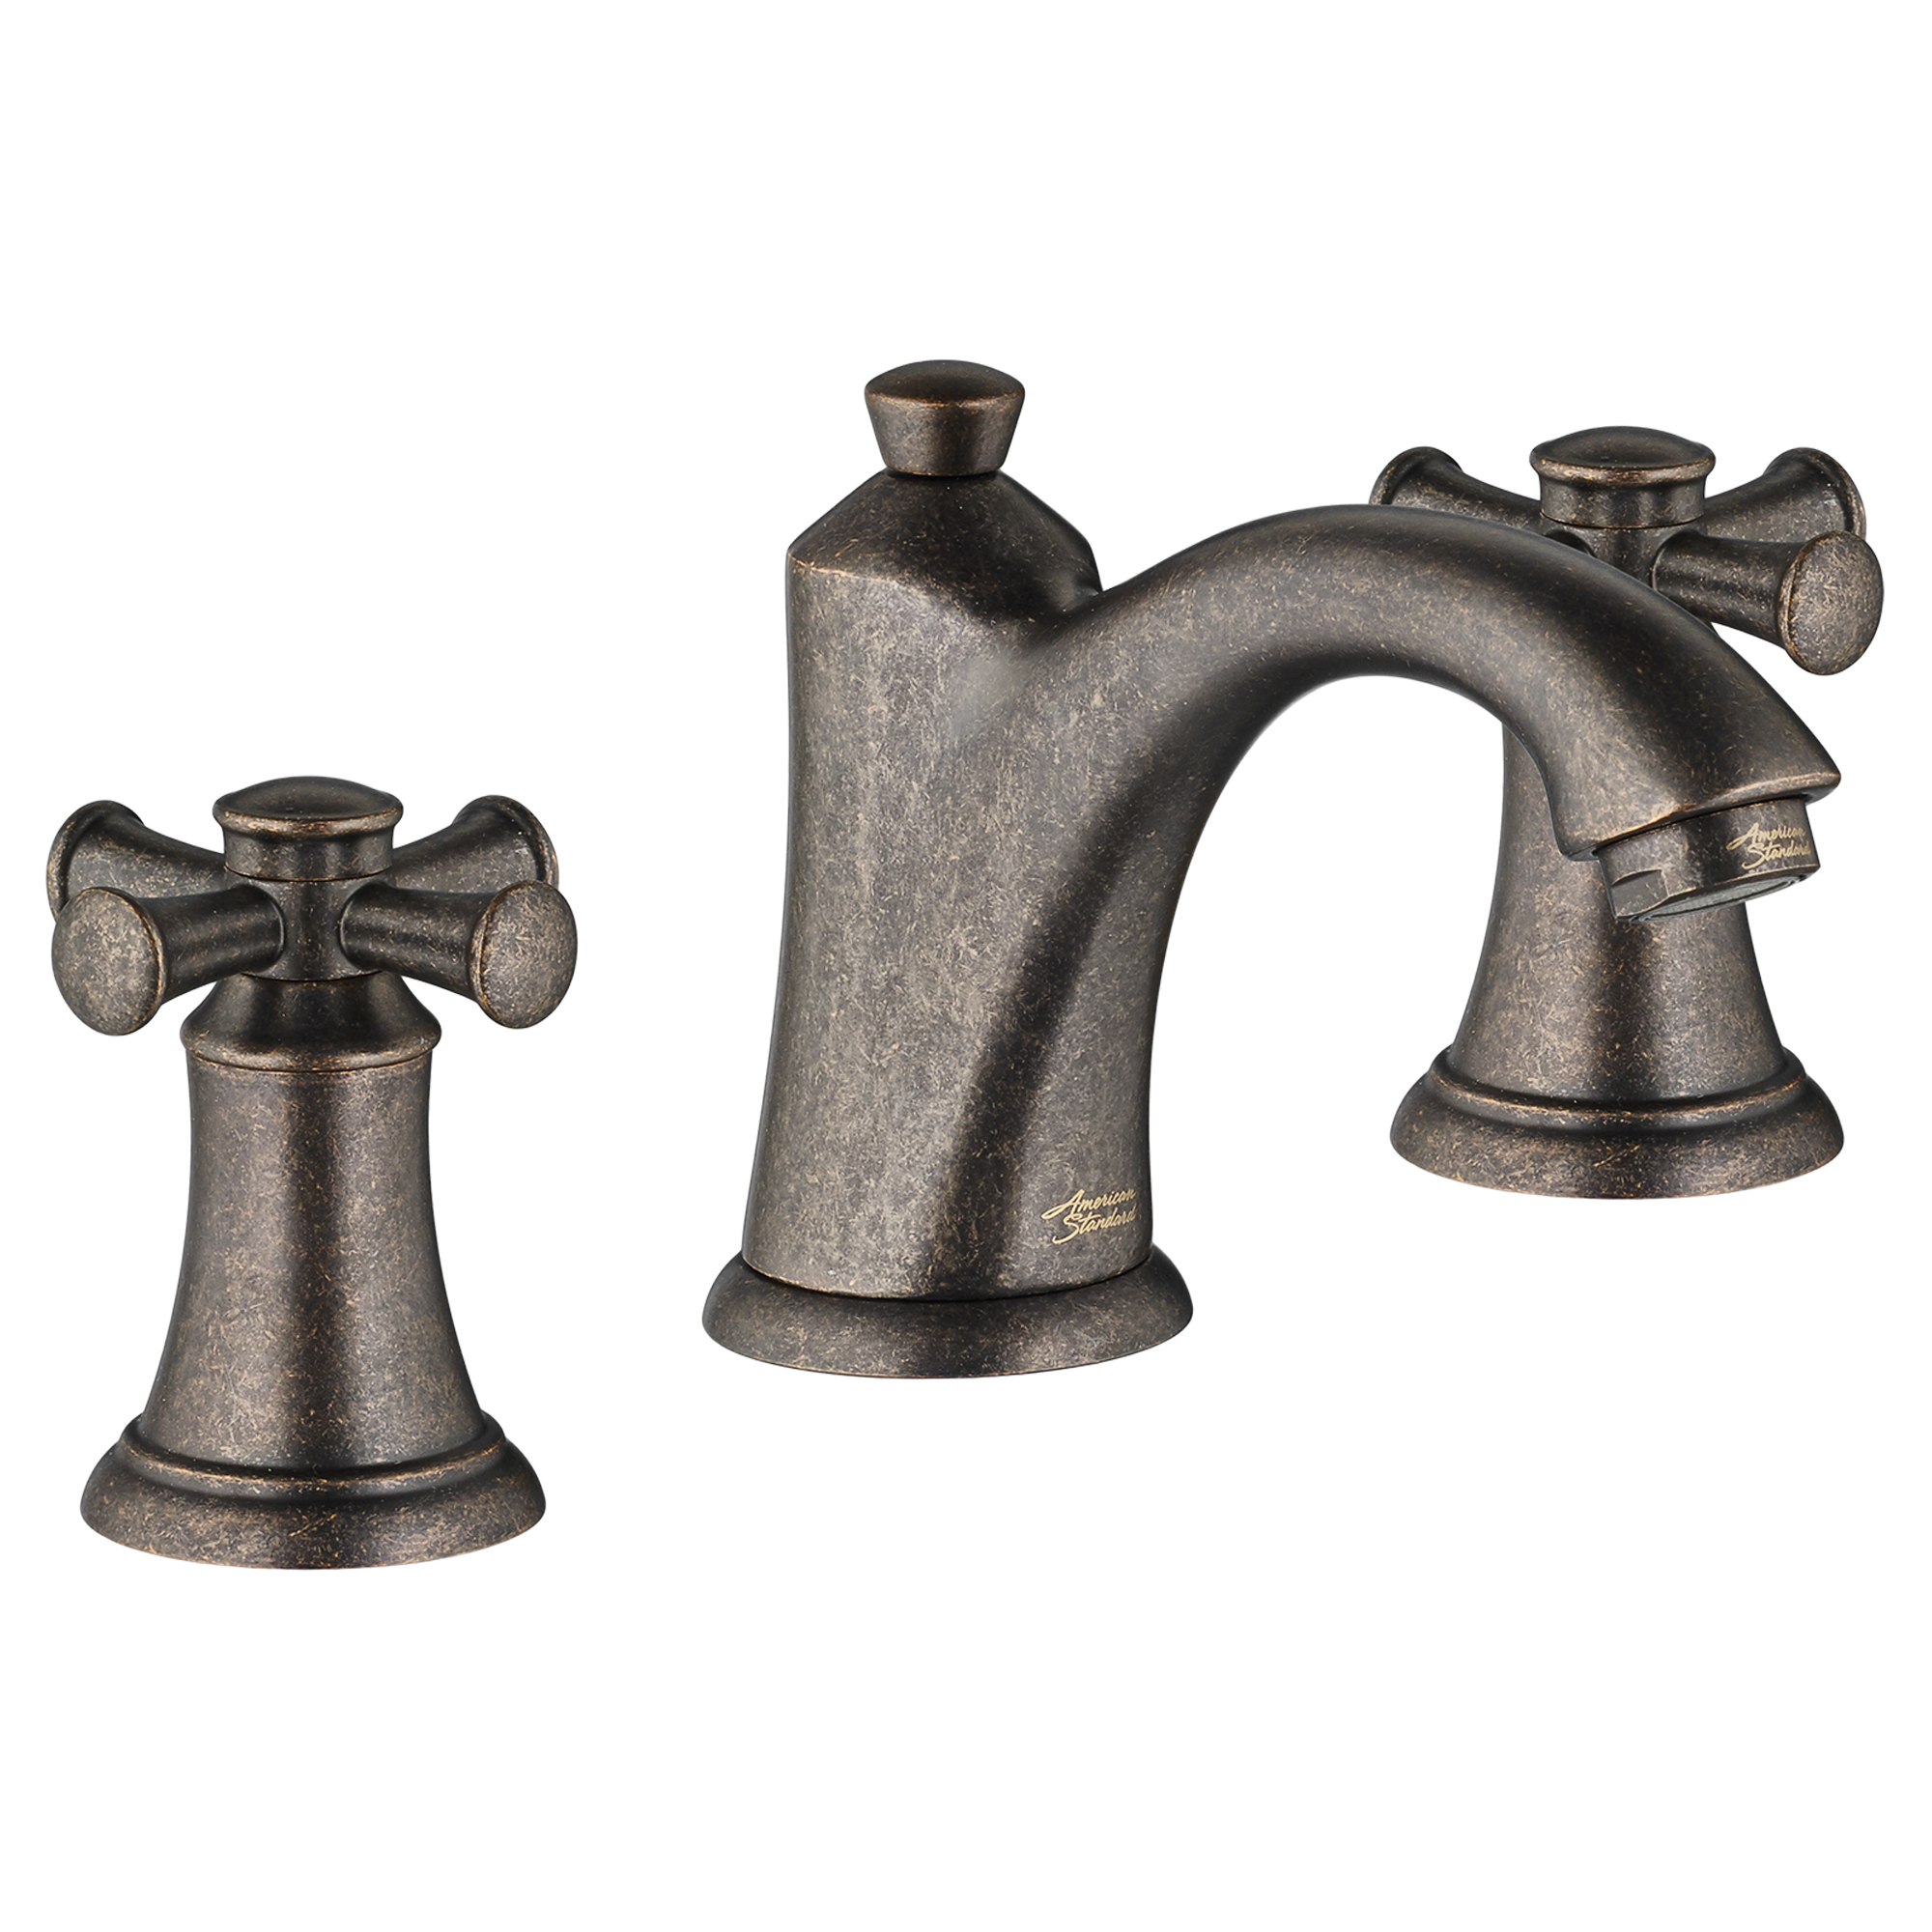 Portsmouth 8-In. Widespread 2-Handle Bathroom Faucet 1.2 GPM with Cross Handles